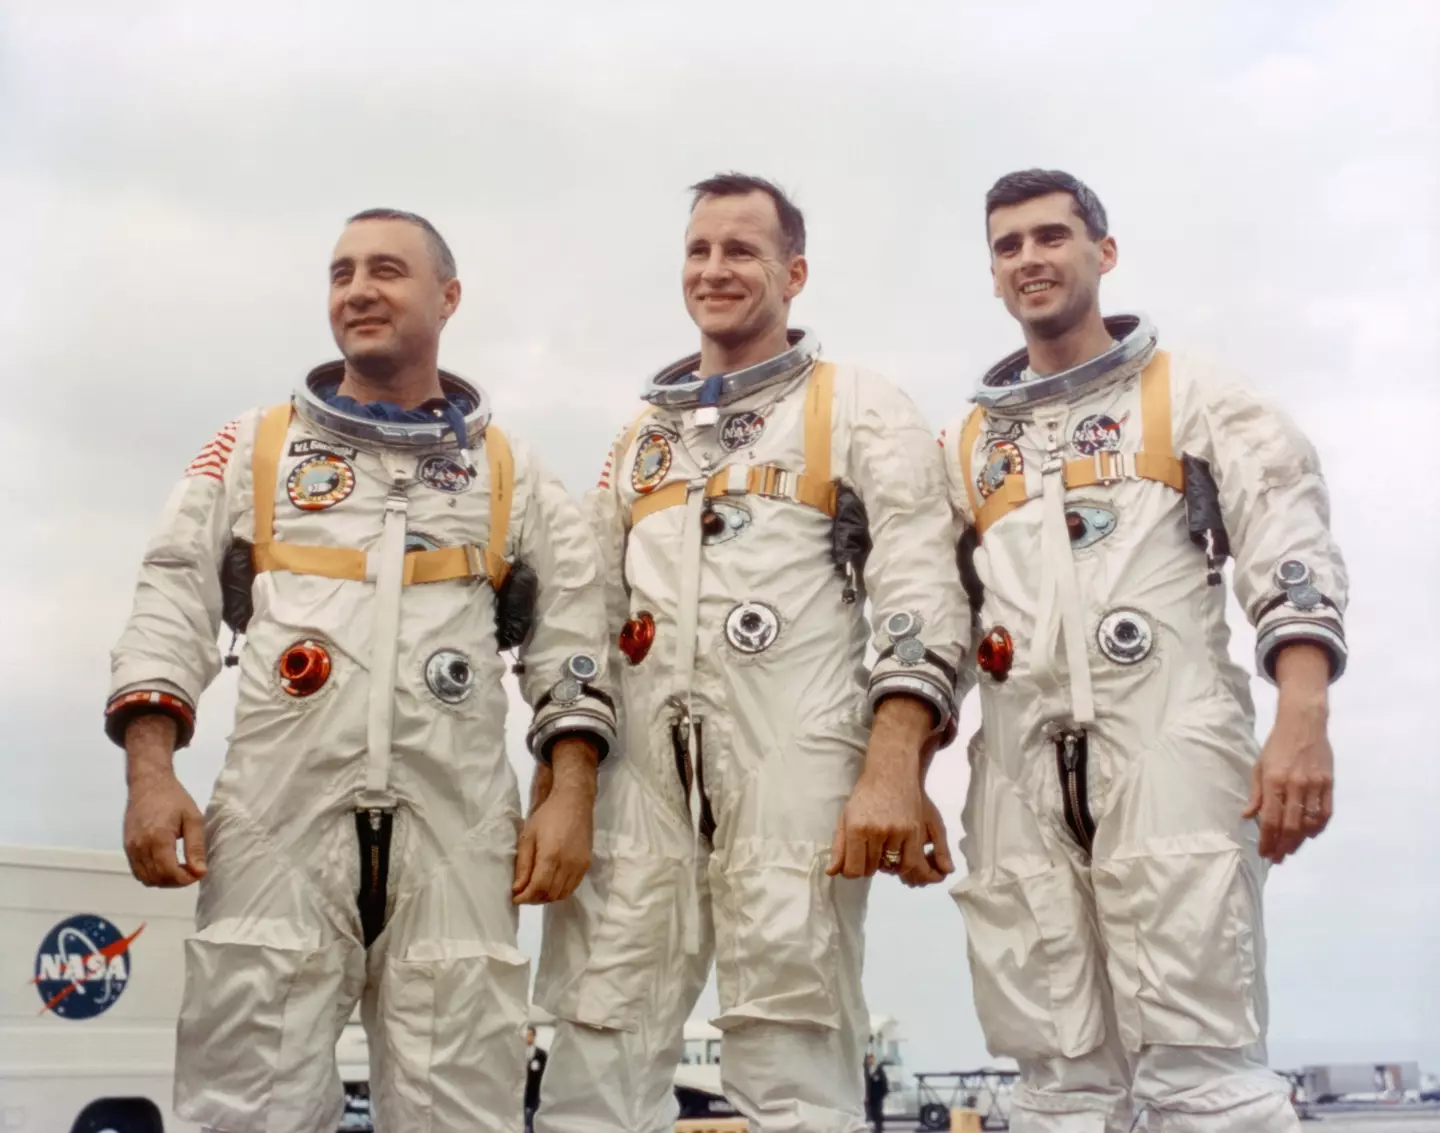 Astronauts Virgil 'Gus' Grissom, Edward White and Roger B. Chaffee tragically lost their lives in the disaster. (Space Frontiers/Getty Images)